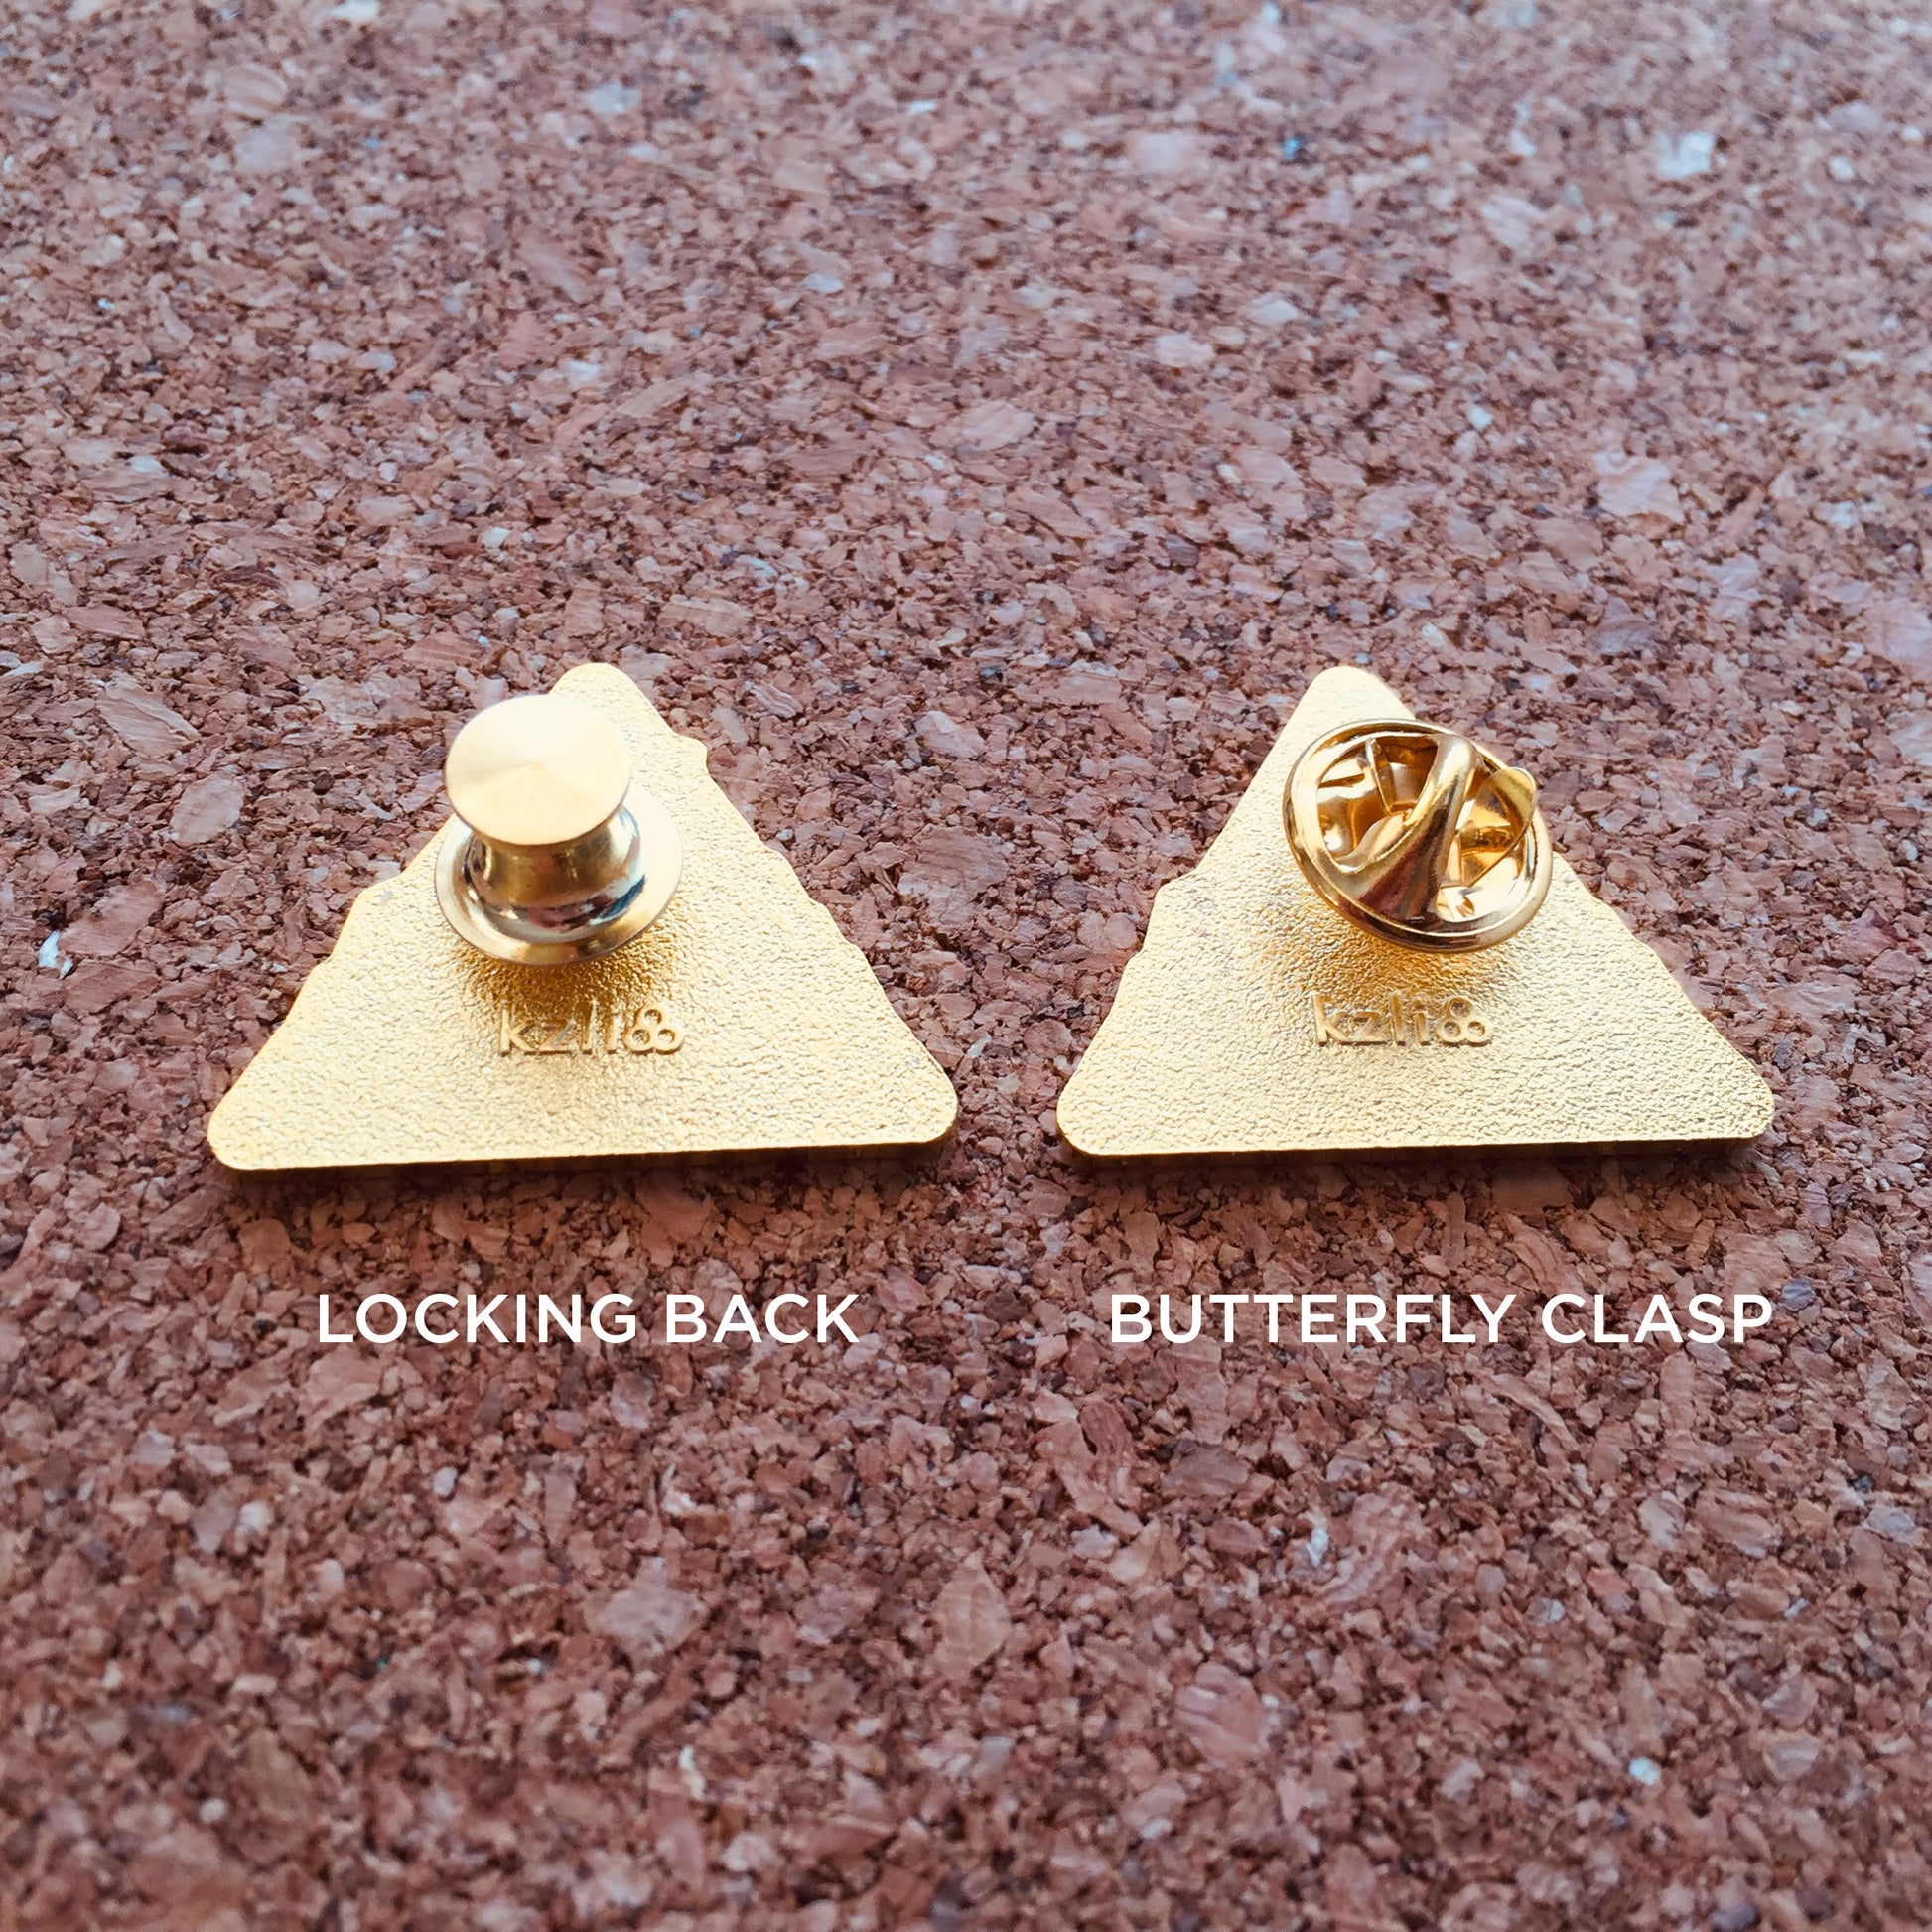 side by side comparison of a locking back vs. a butterfly clasp for the pin